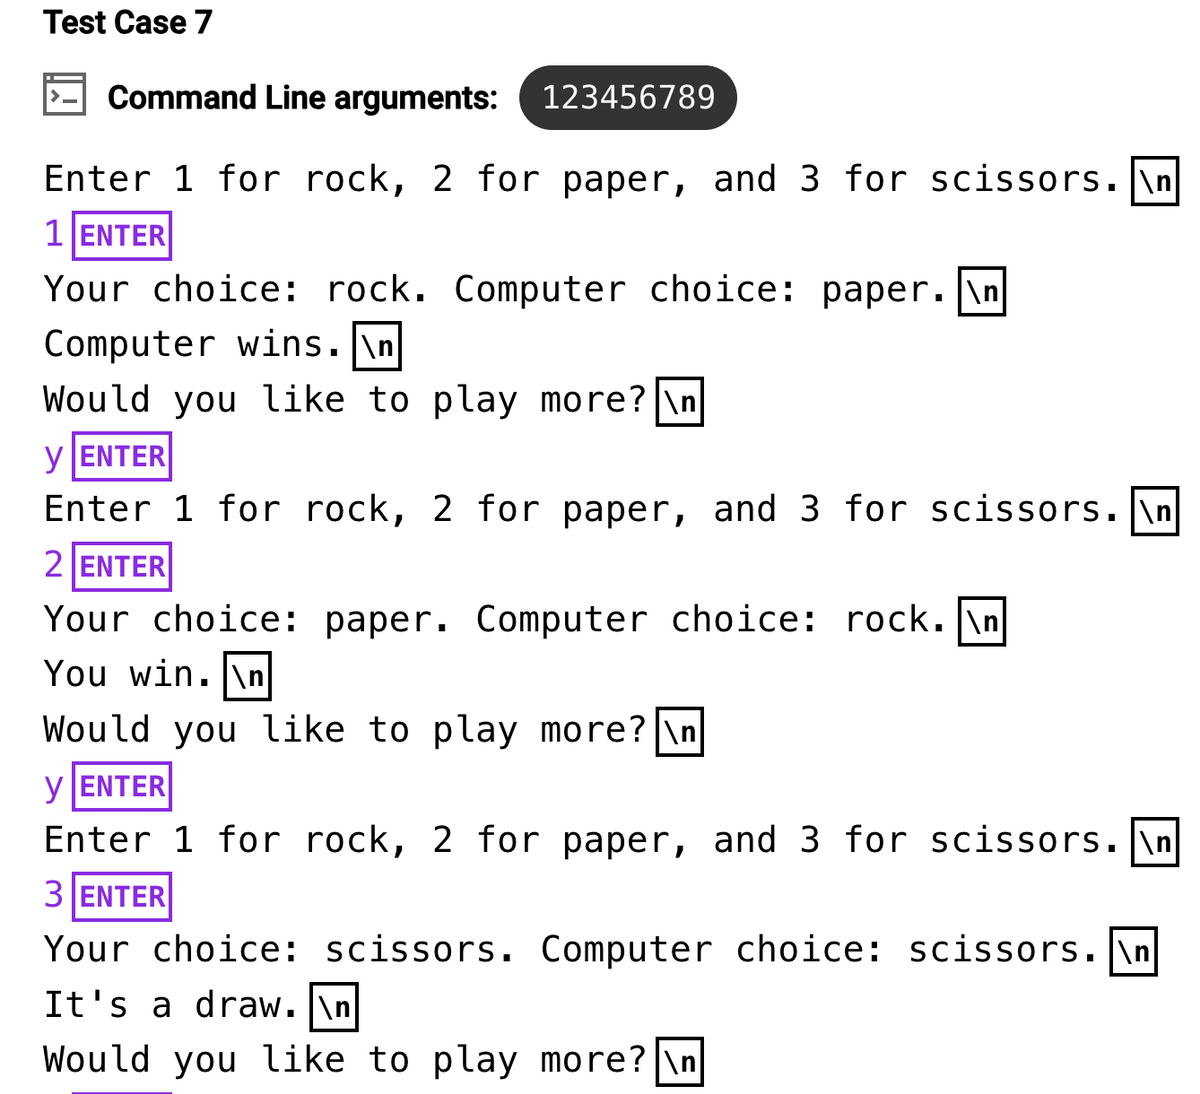 Test Case 7
Command Line arguments: 123456789
Enter 1 for rock, 2 for paper, and 3 for scissors.\n
1 ENTER
Your choice: rock. Computer choice: paper. \n
Computer wins.\n
Would you like to play more? \n
y ENTER
Enter 1 for rock, 2 for paper, and 3 for scissors. \n
2 ENTER
Your choice: paper. Computer choice: rock.\n
You win. \n
Would you like to play more? \n
y ENTER
Enter 1 for rock, 2 for paper, and 3 for scissors.\n
3 ENTER
Your choice: scissors. Computer choice: scissors. \n
It's a draw. \n
Would you like to play more? \n